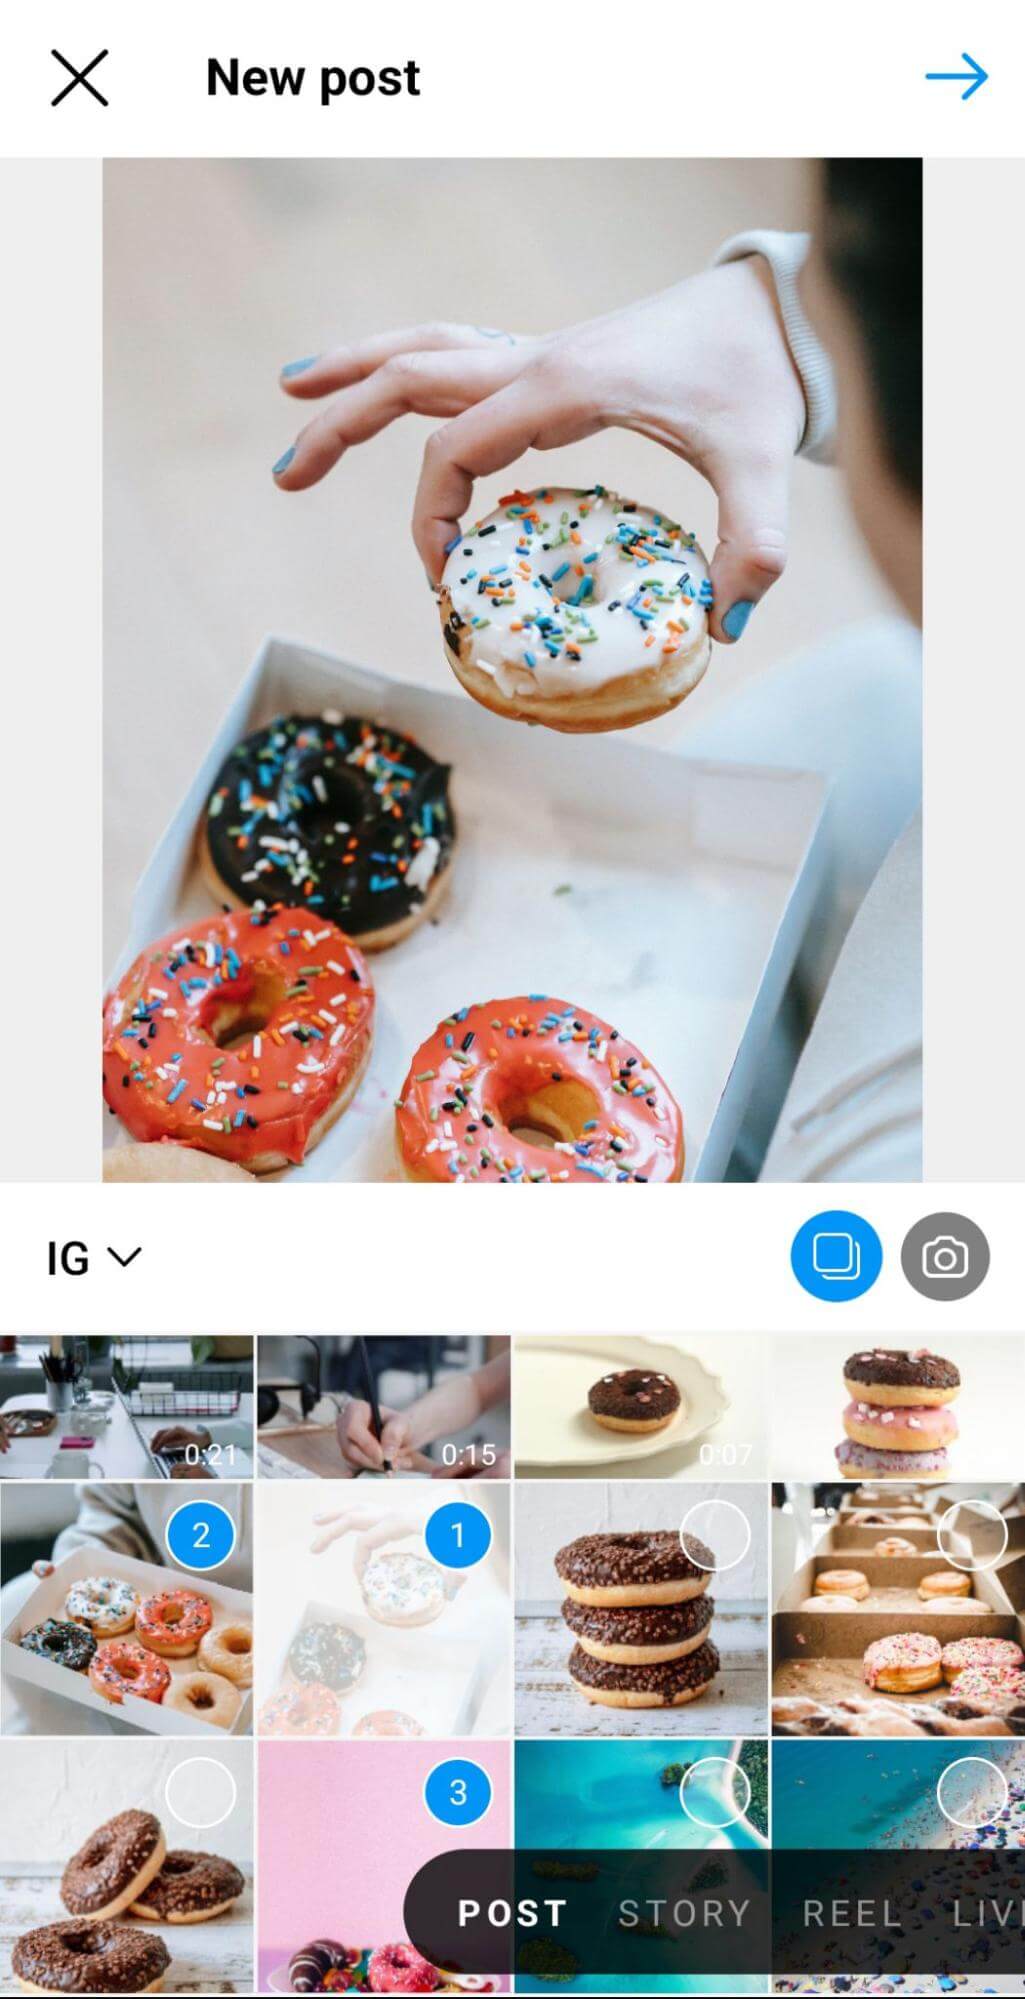 design-mobile-first-social-media-images-consistent-sizing-for-carousels-instagram-7